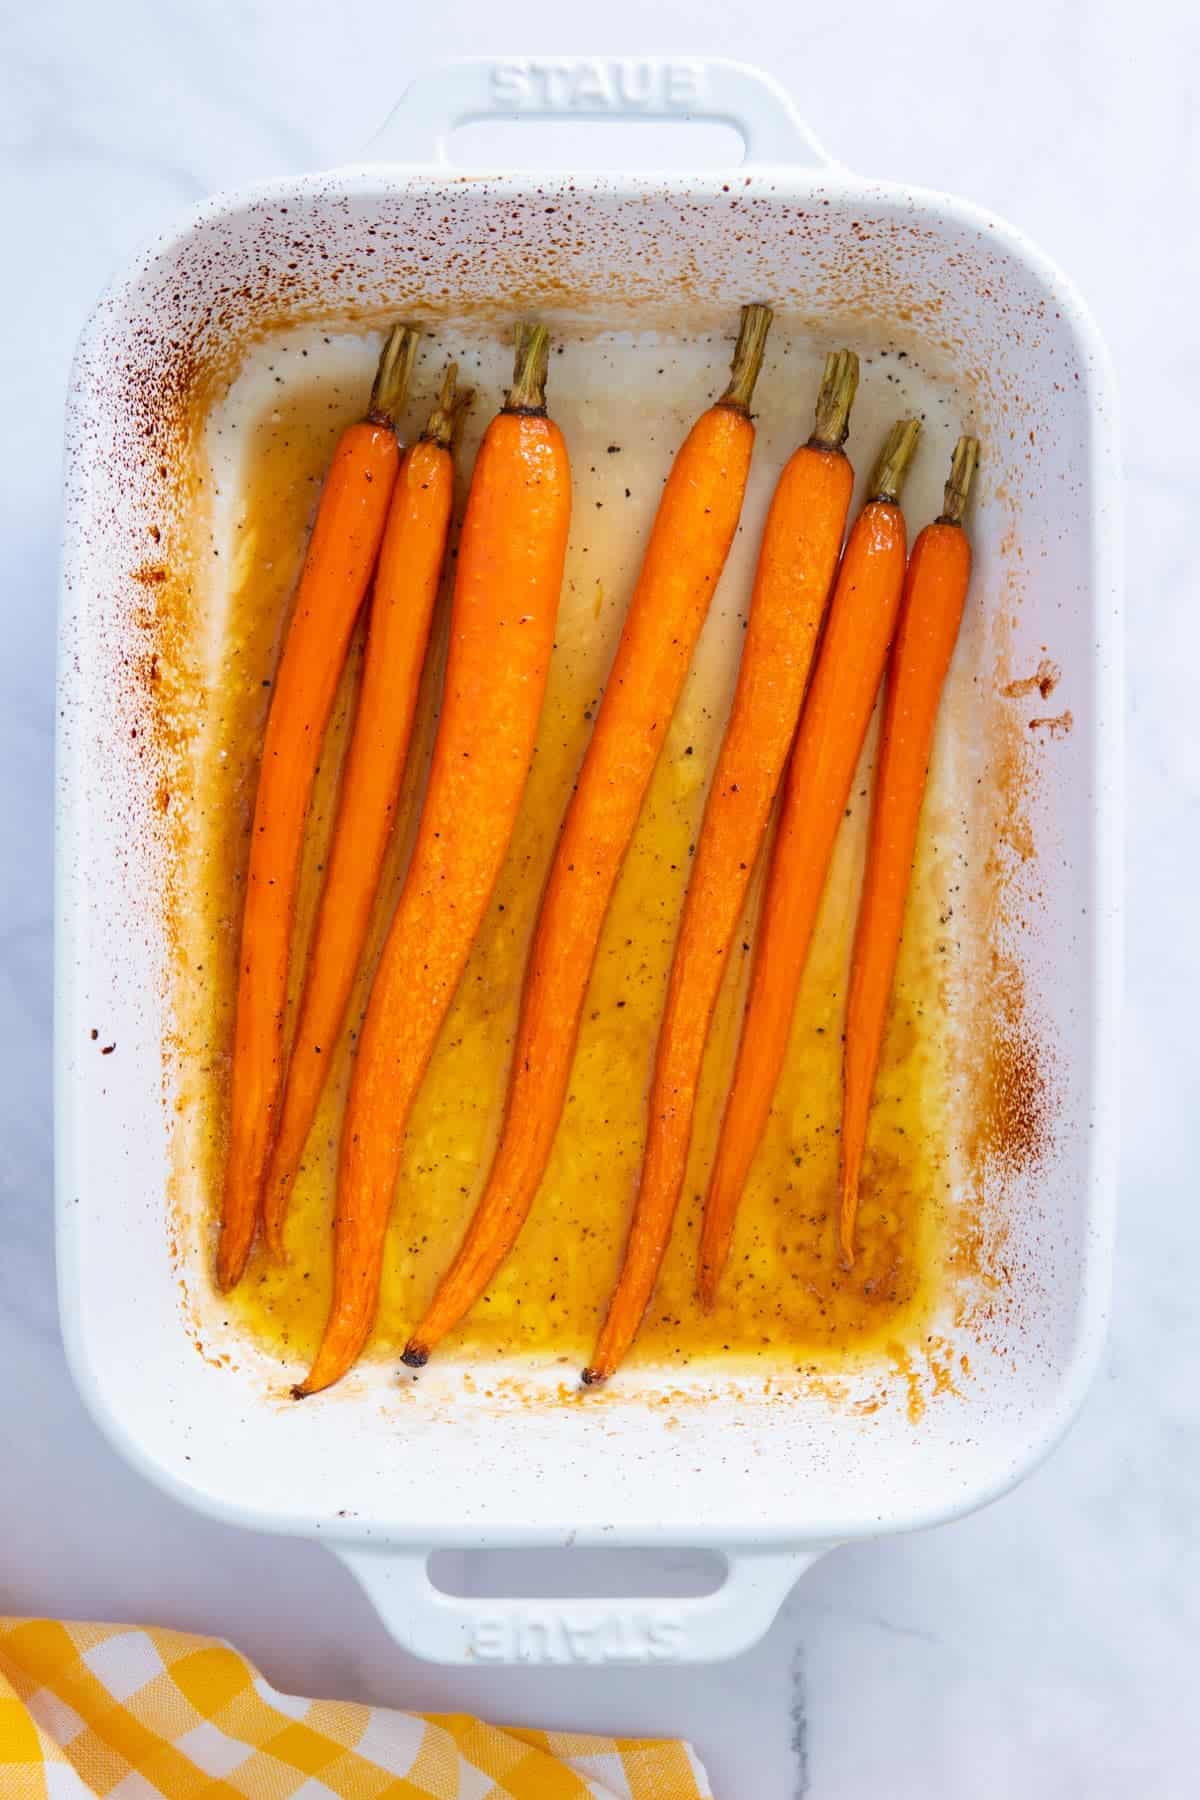 Maple glazed carrots with brown sugar fresh out of the oven.